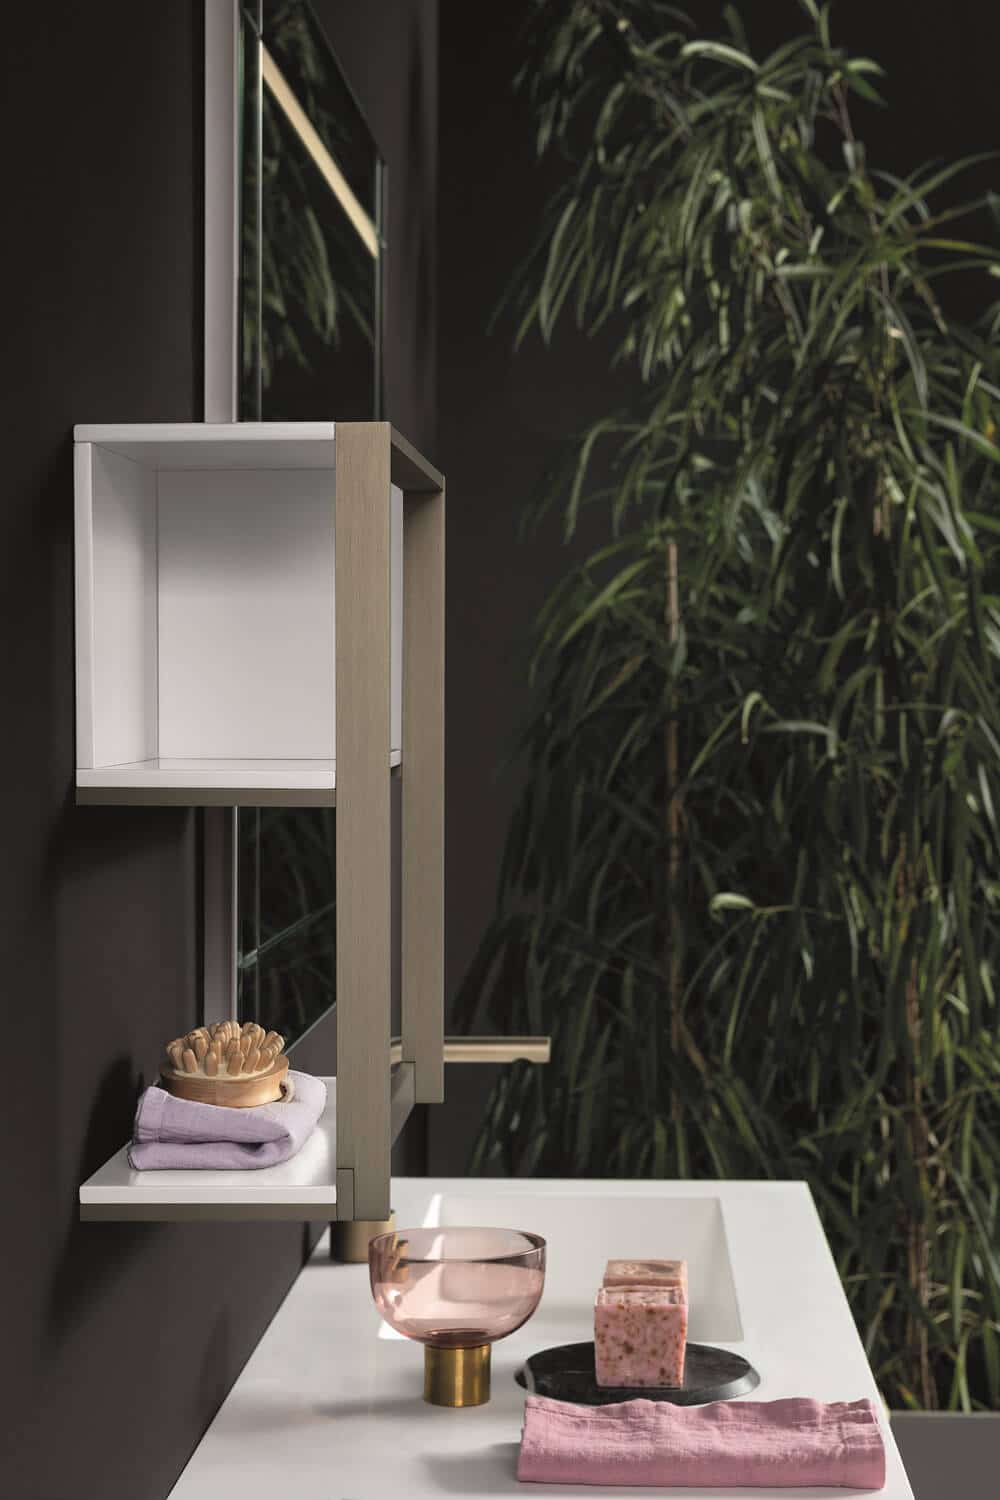 The Quari open shelves can always match the finishes of the other bathroom elements, like vanities, tops and washbasins.